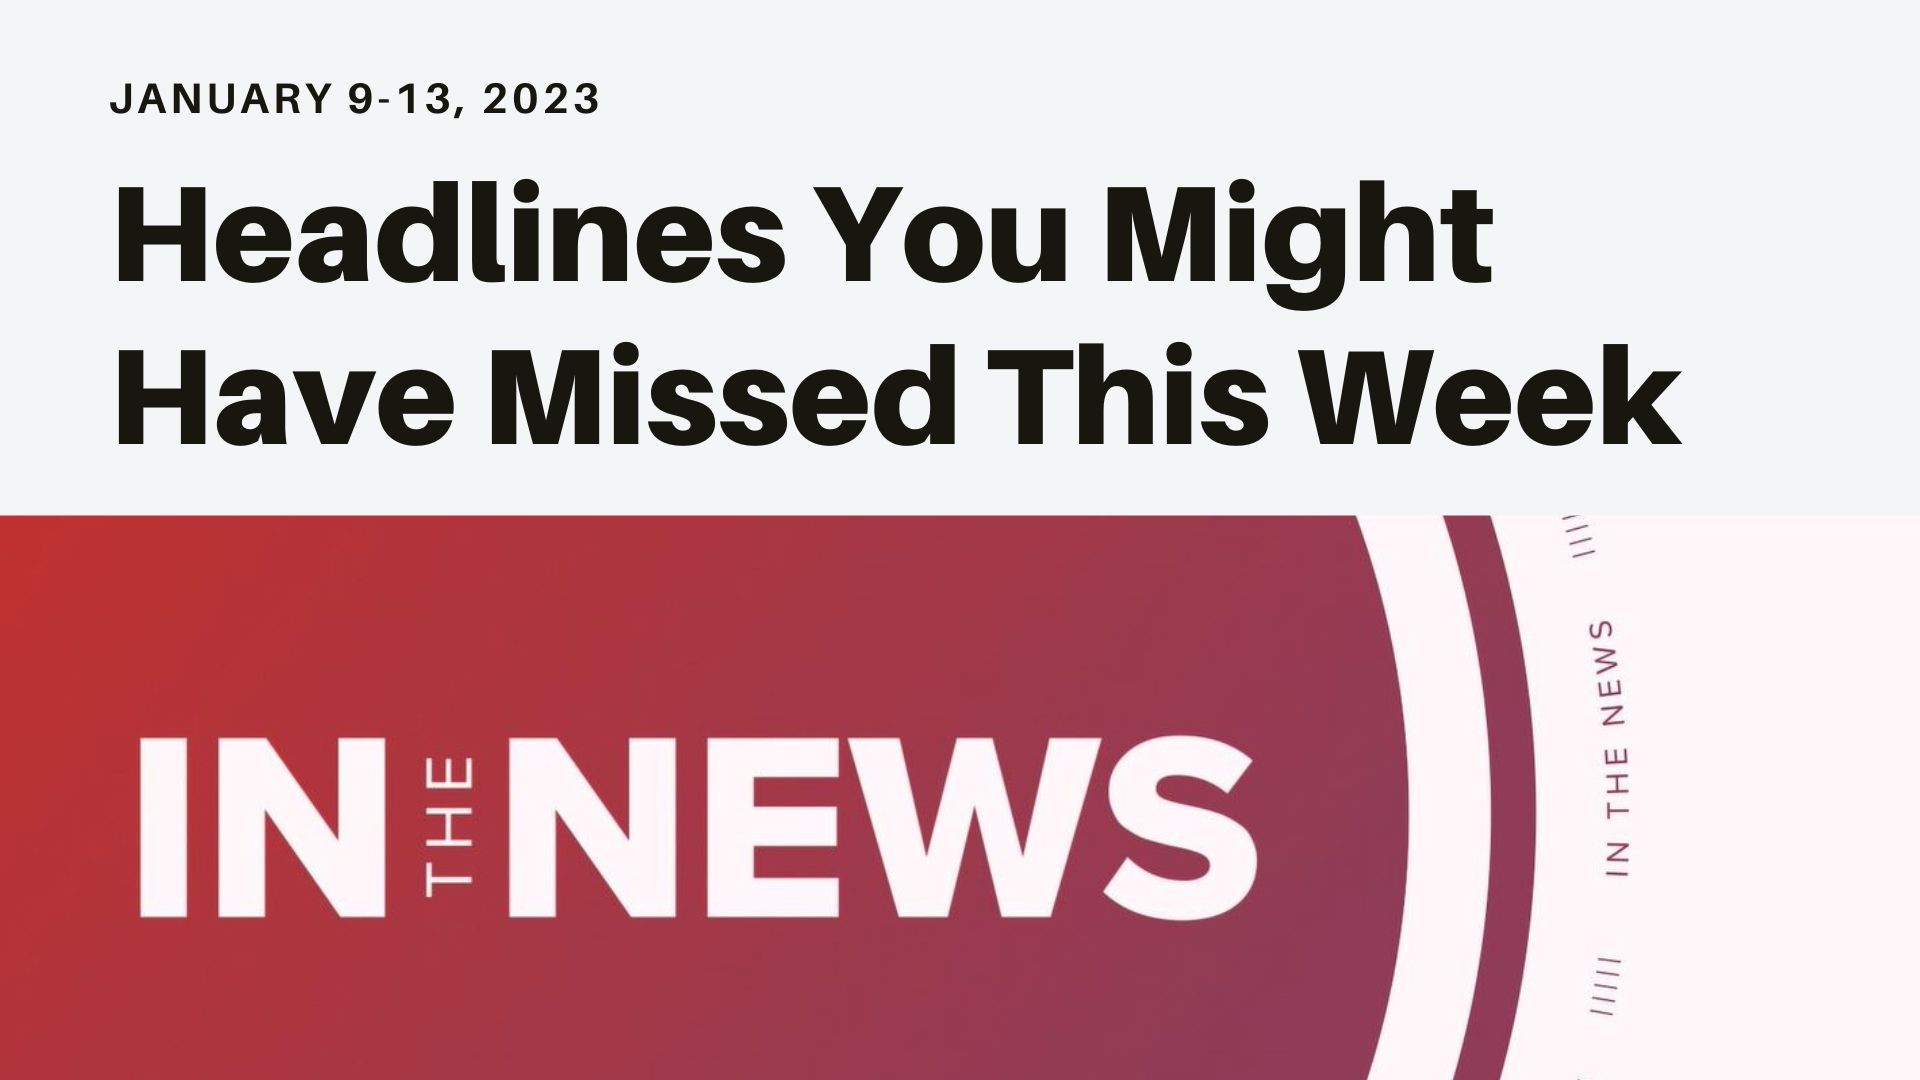 A look at some of the news headlines you might have missed this week from classified documents found from Biden's VP days to egg prices and wild weather.